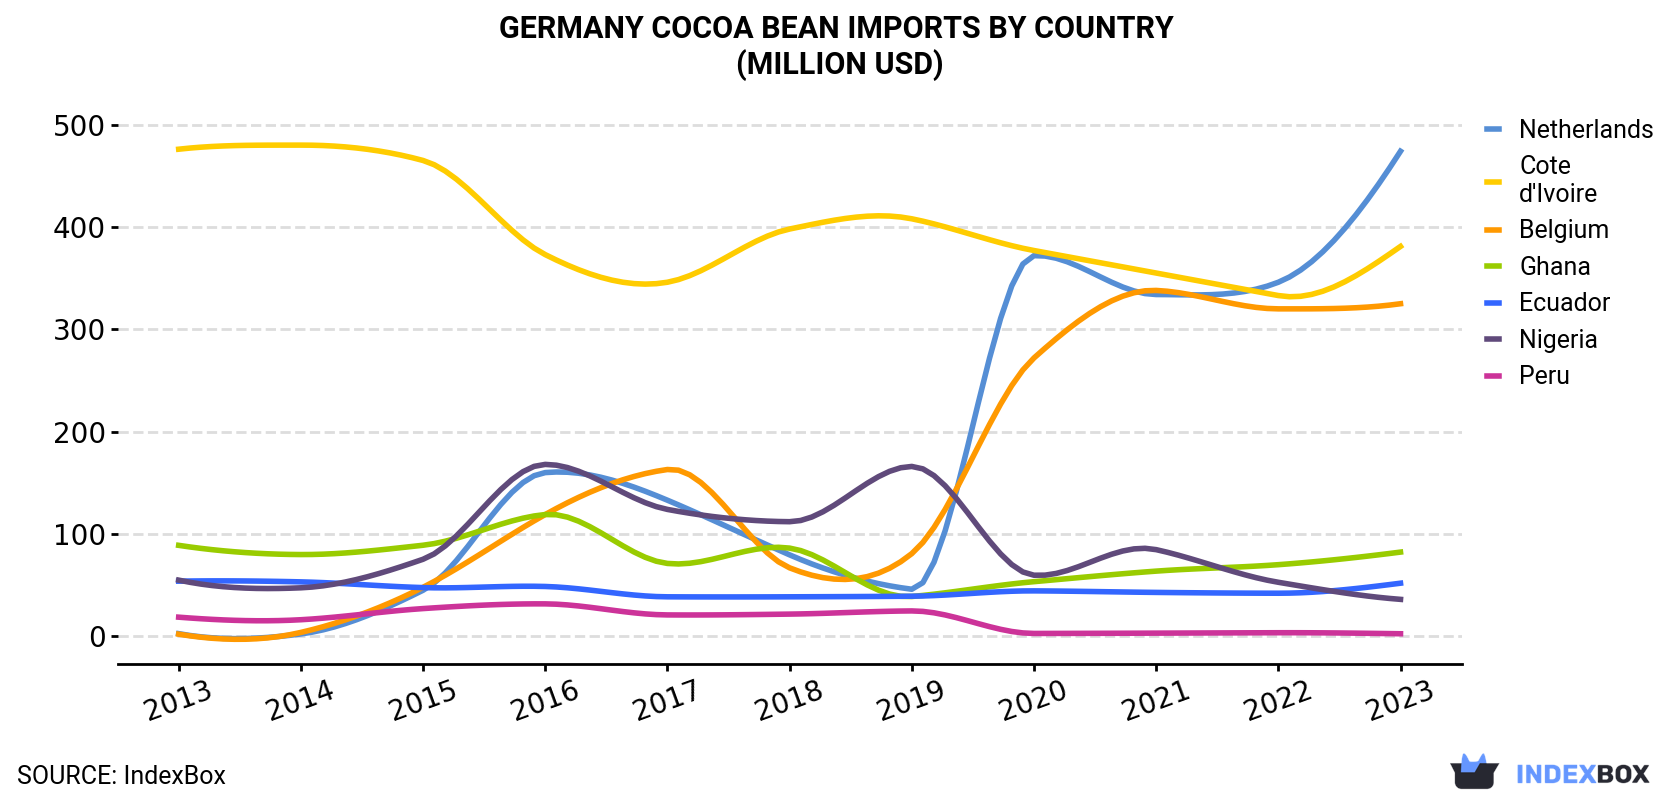 Germany Cocoa Bean Imports By Country (Million USD)